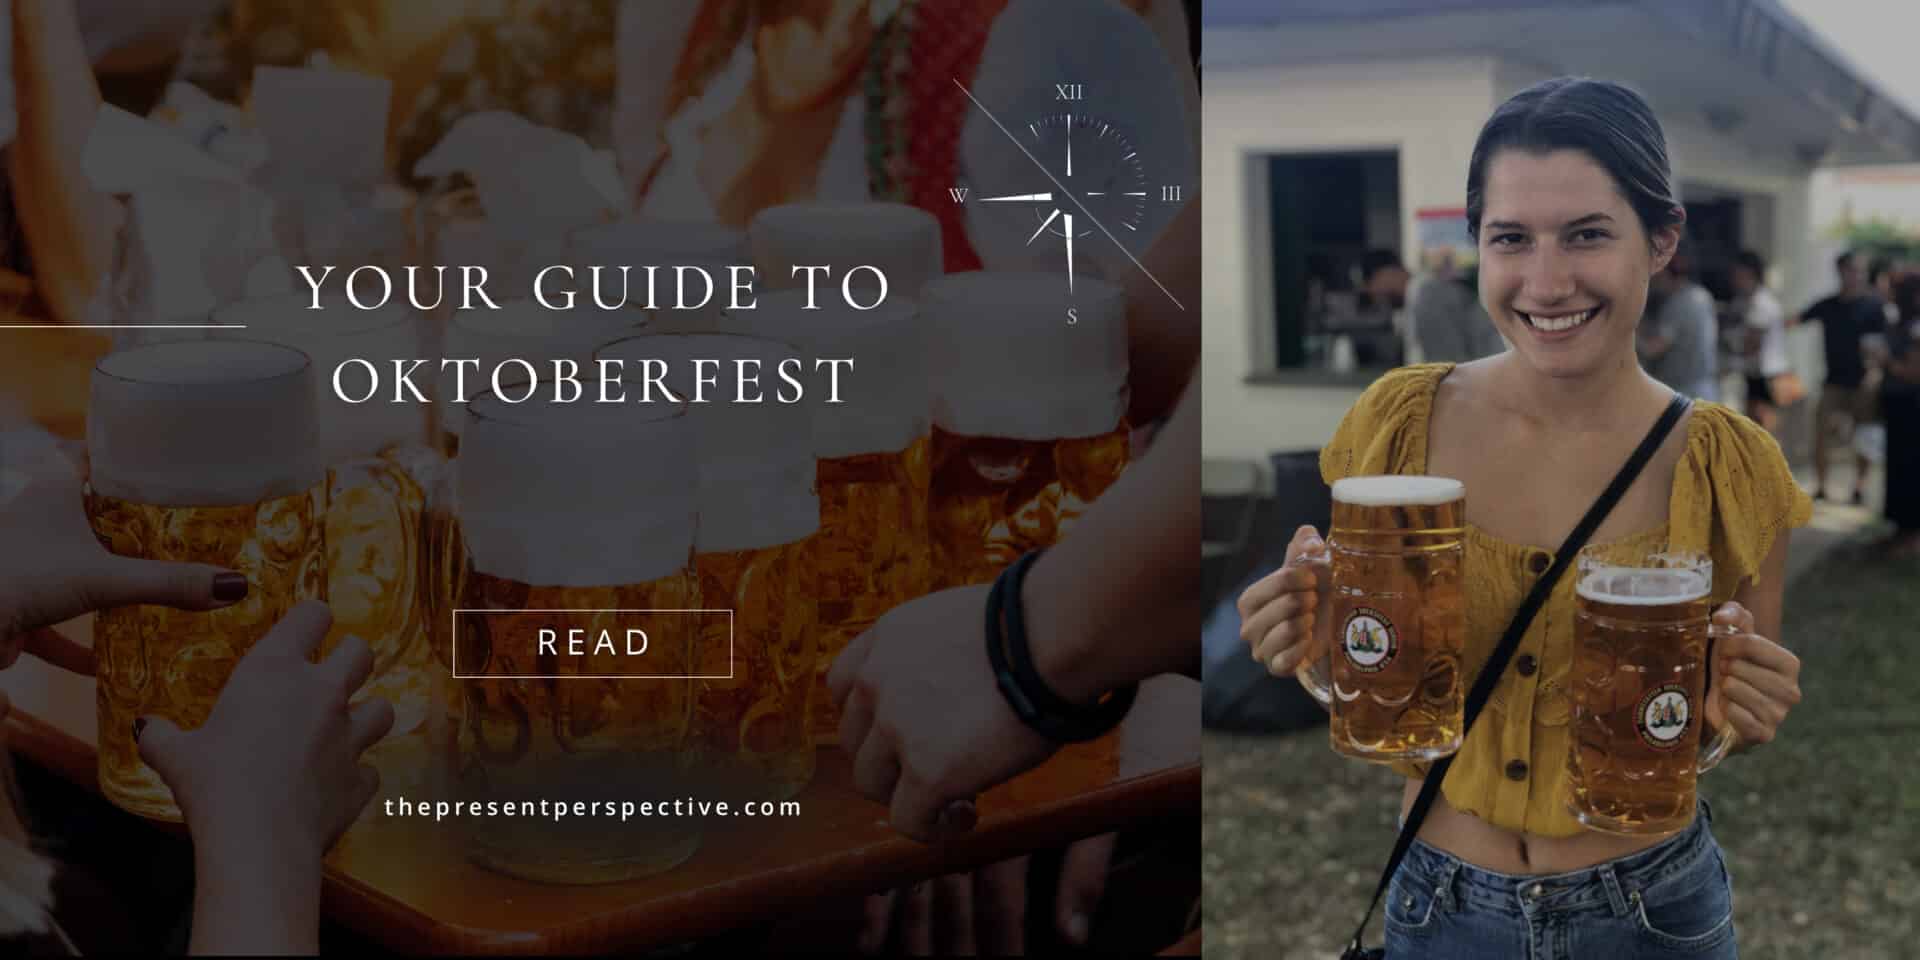 advertisement banner for Oktoberfest guide with beer steins